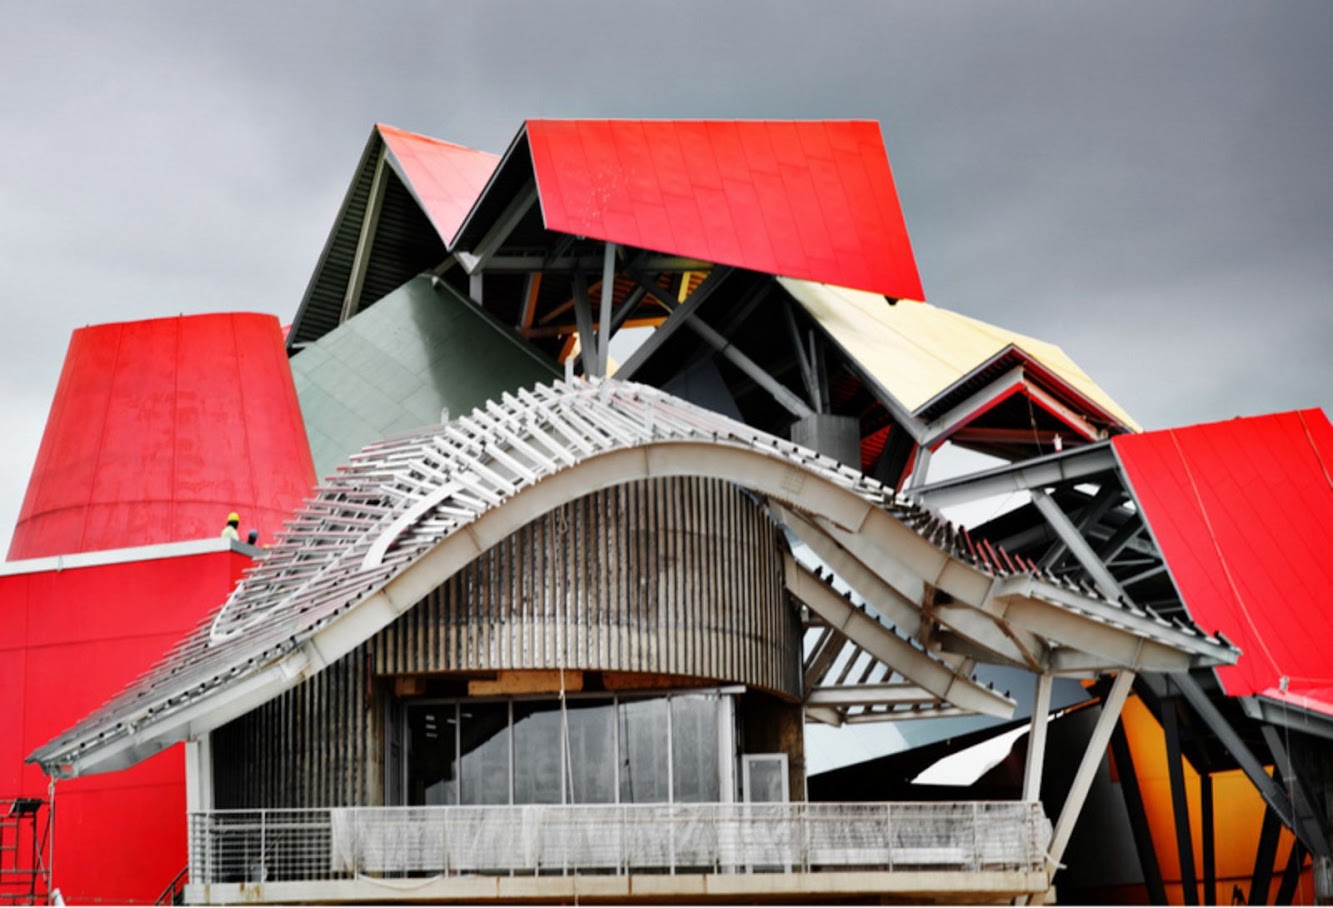 Next Opening of Panama Biomuseo by Frank Gehry